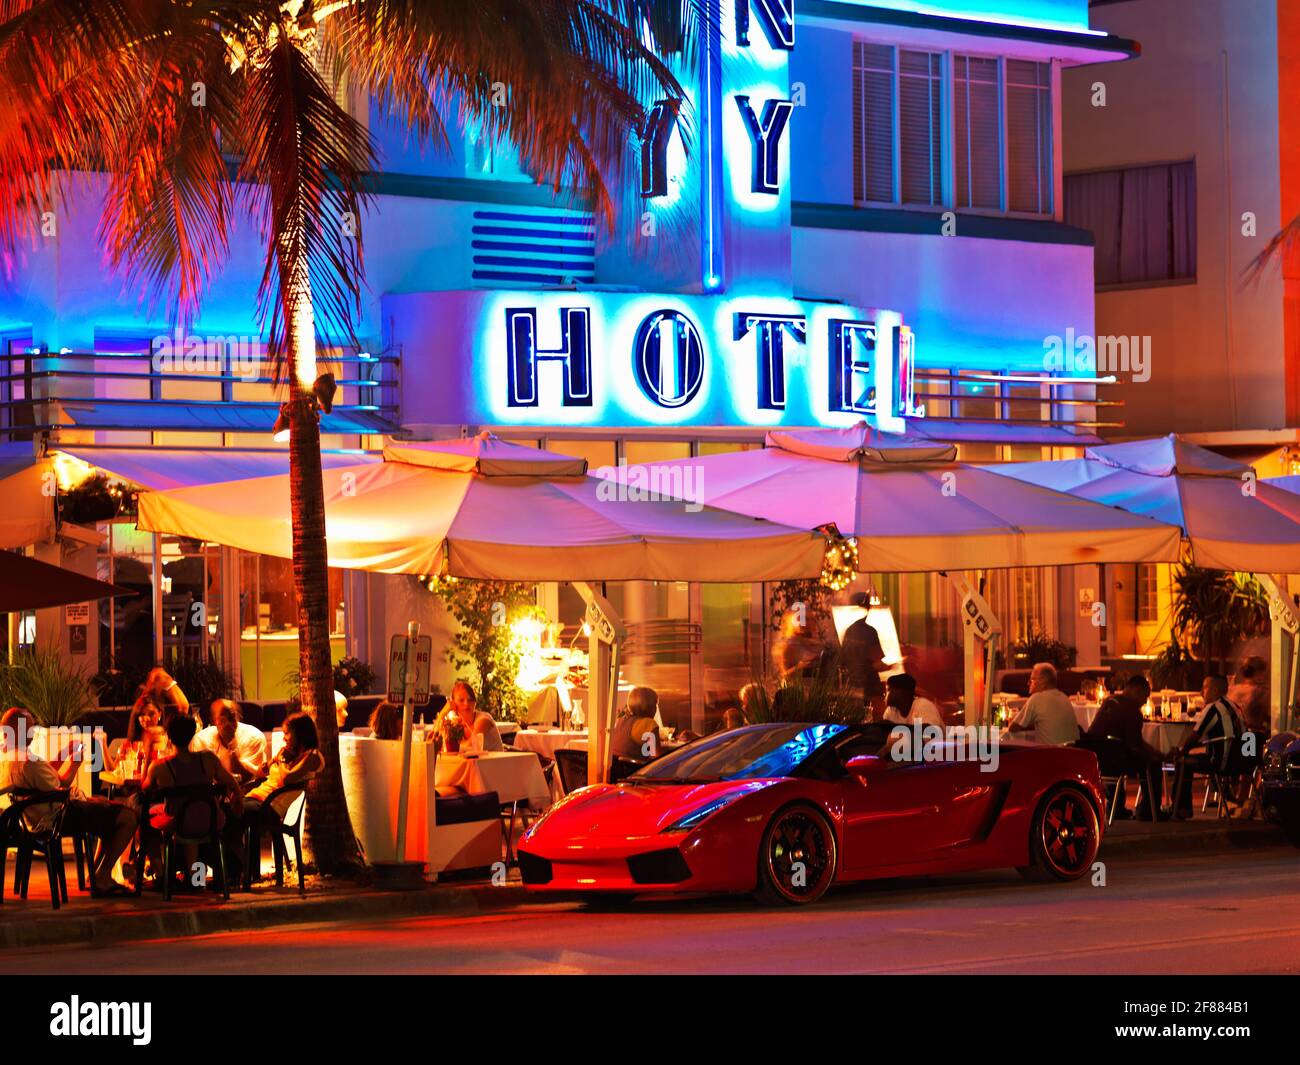 USA,Florida, South Beach Miami, Neon signs, art deco hotel and restaurants illuminated at night on Ocean Drive. Red sports car parked . Stock Photo